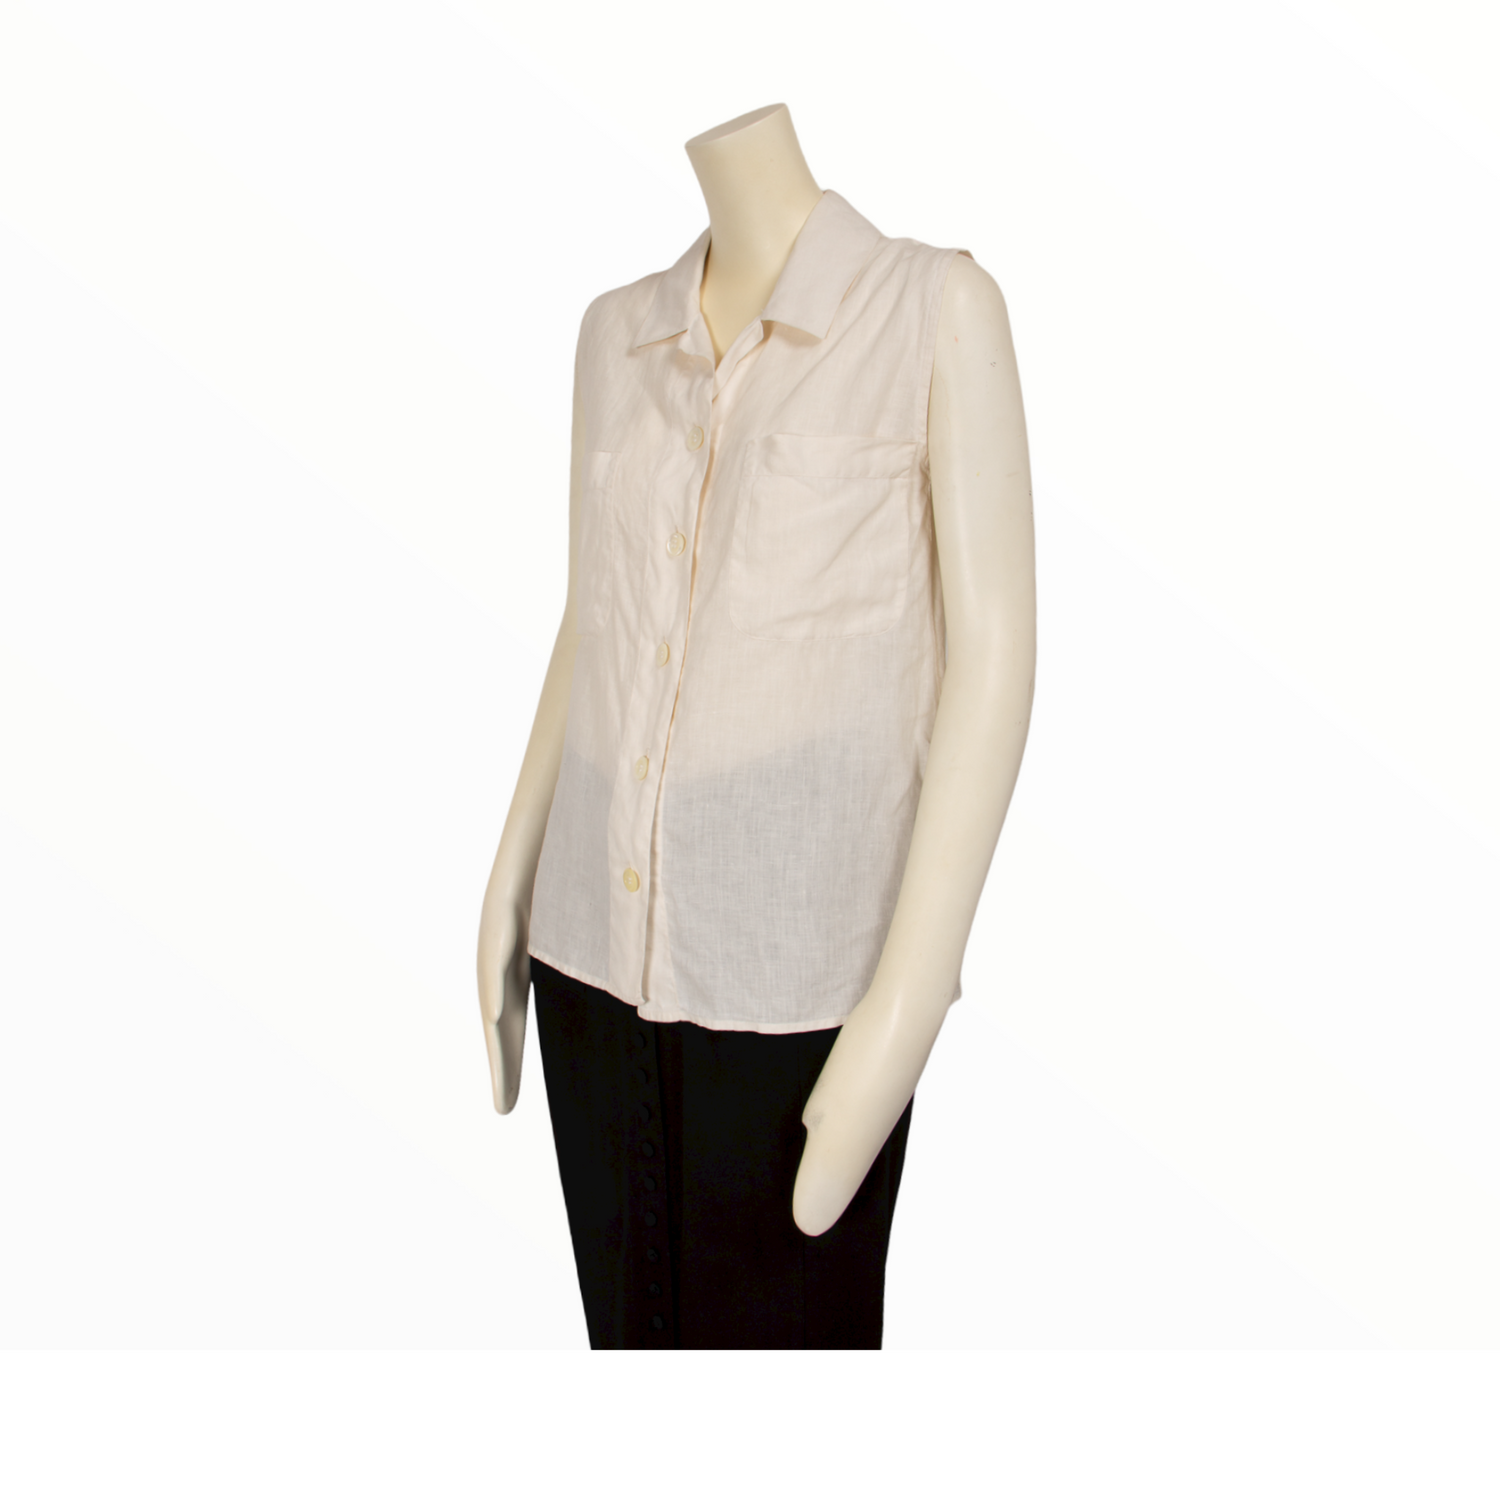 CHANEL Tops vintage Lysis Paris pre-owned secondhand